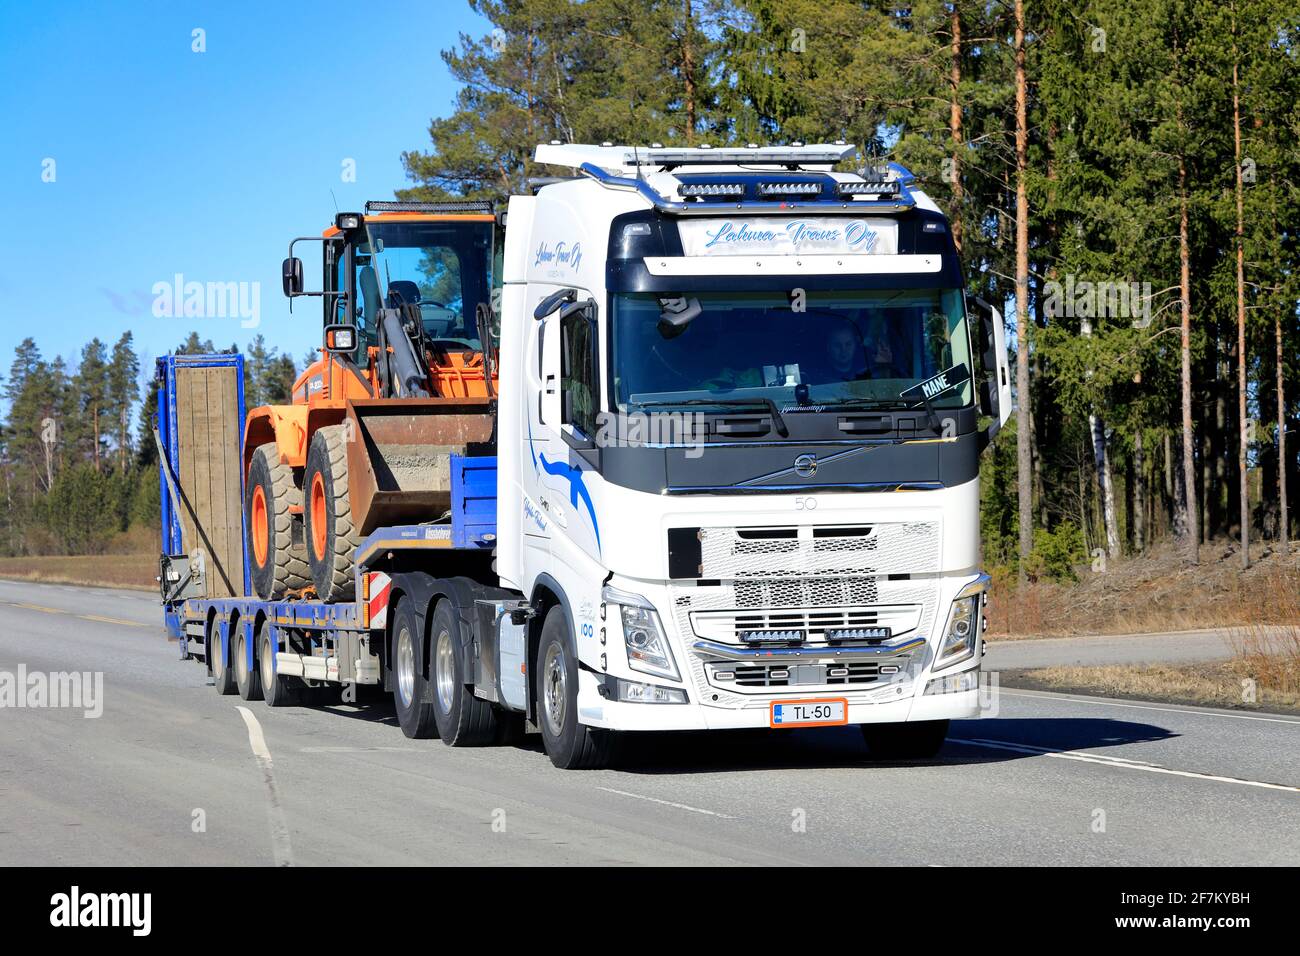 Volvo 540 High Resolution Stock Photography and Images - Alamy